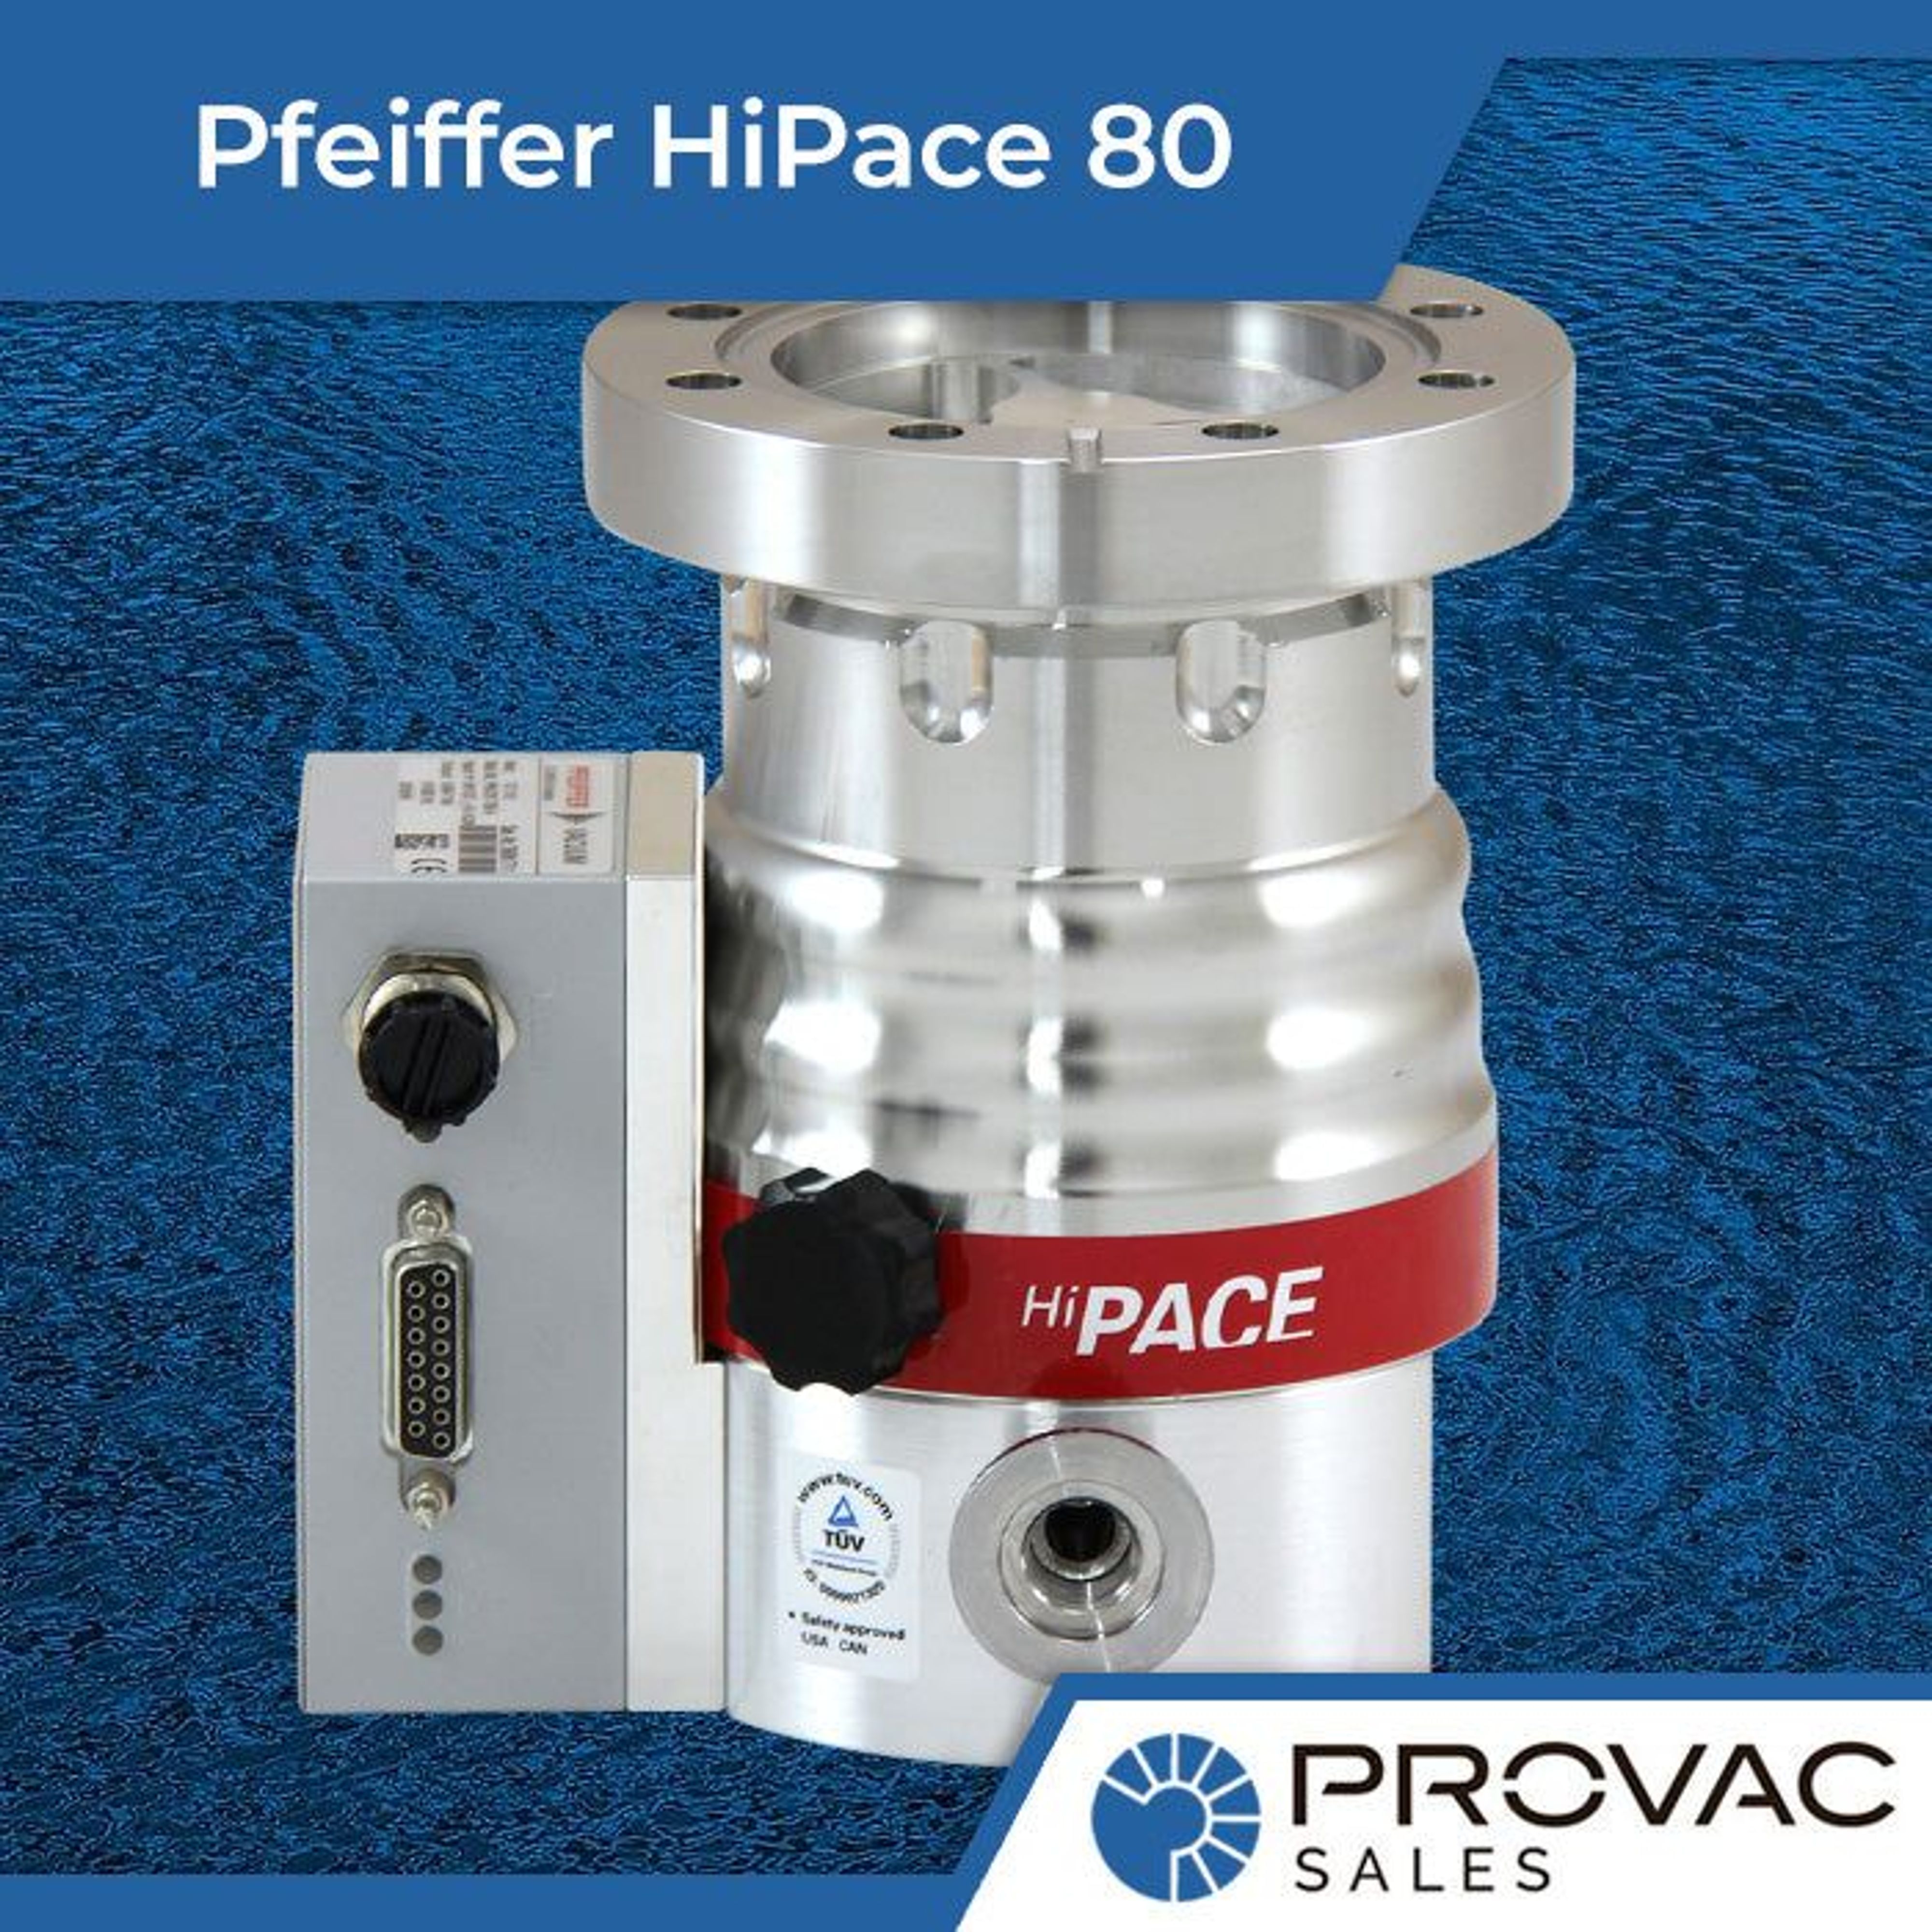 Pfeiffer HiPace 80 Turbo Pumps, In Stock Ready To Ship Background